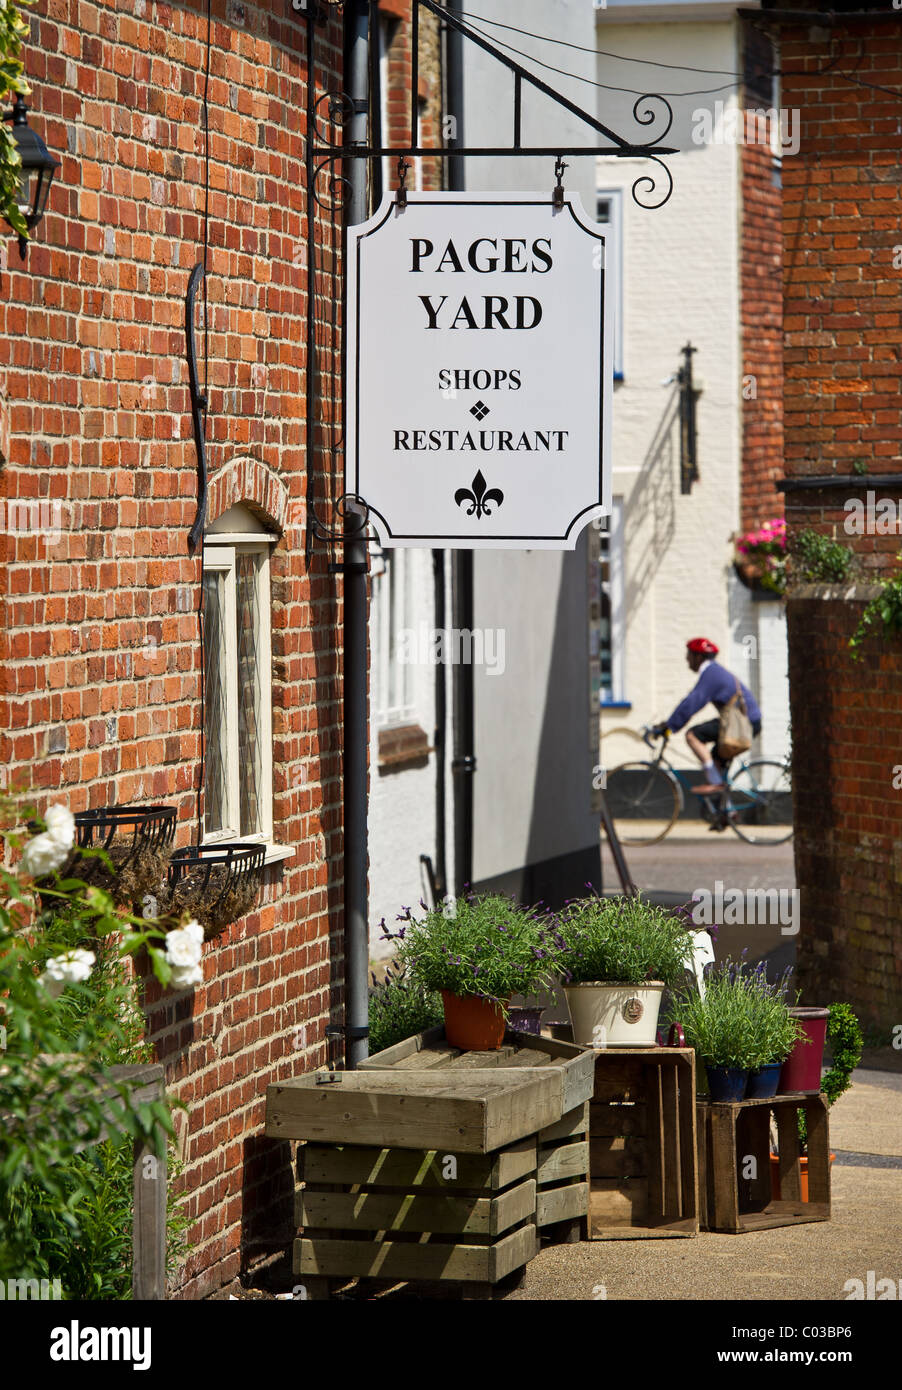 Pages Yard , in pages court petersfield which houses Restaurants , cafe and shops Stock Photo